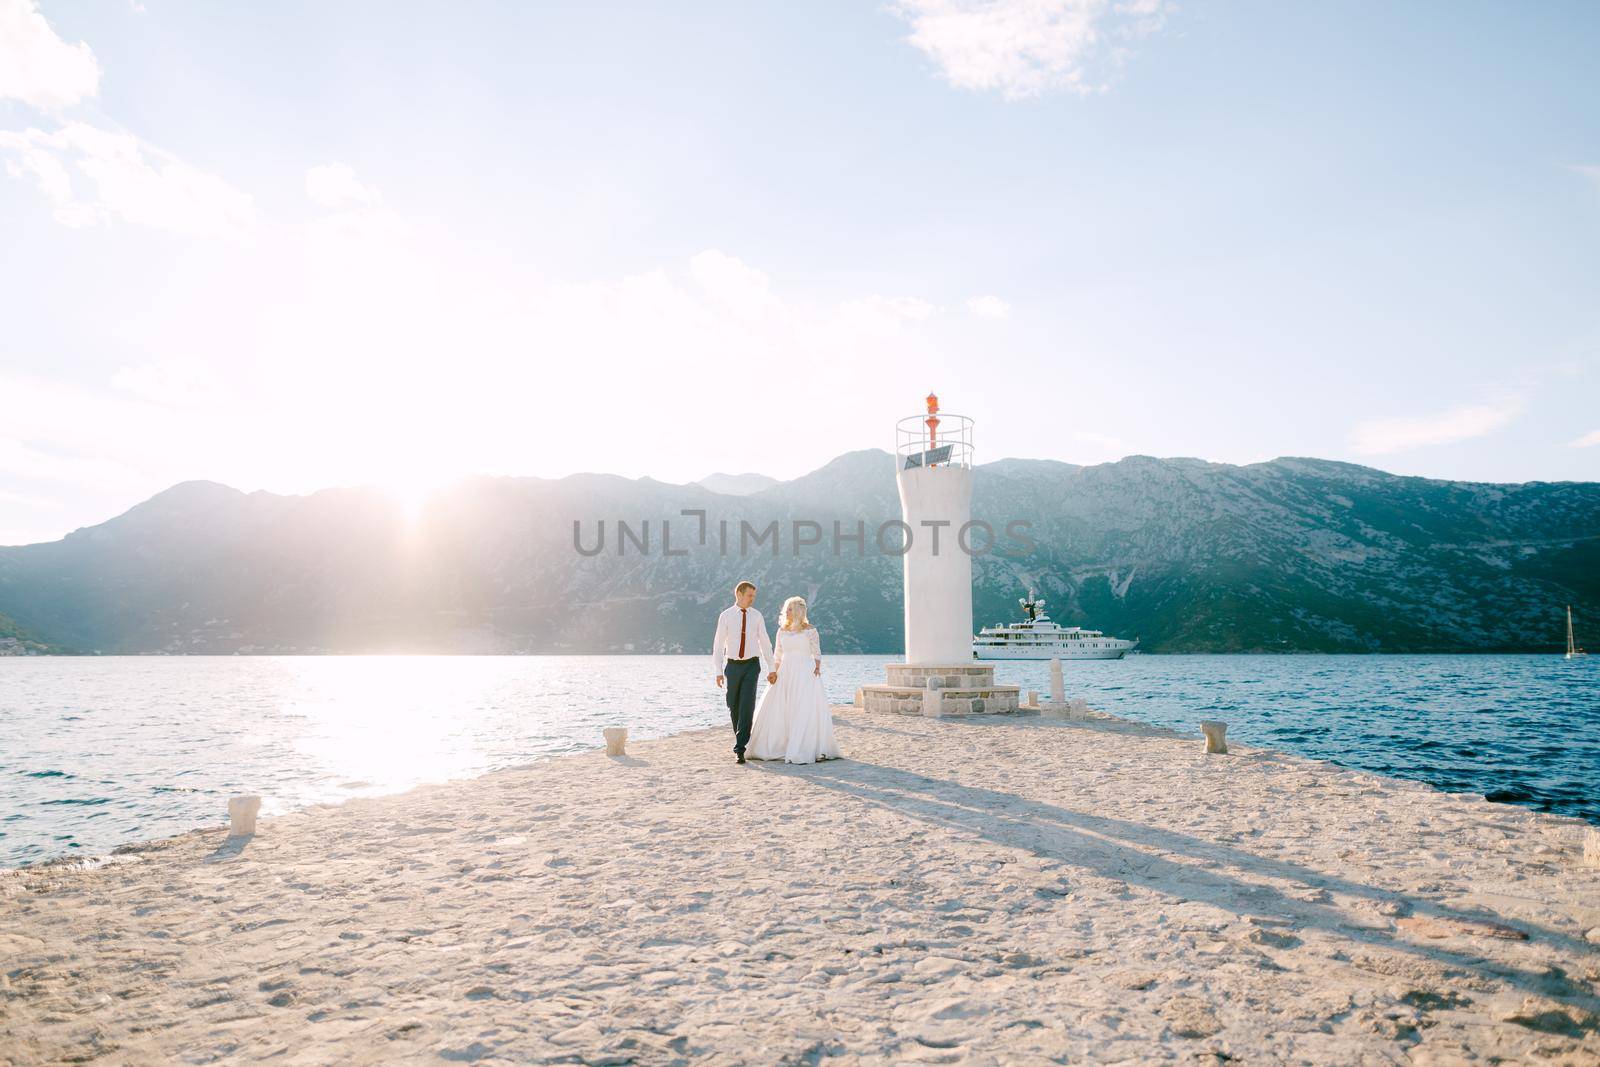 The bride and groom walk hand in hand near the lighthouse on the pier on the Our Lady of the Rocks island by Nadtochiy